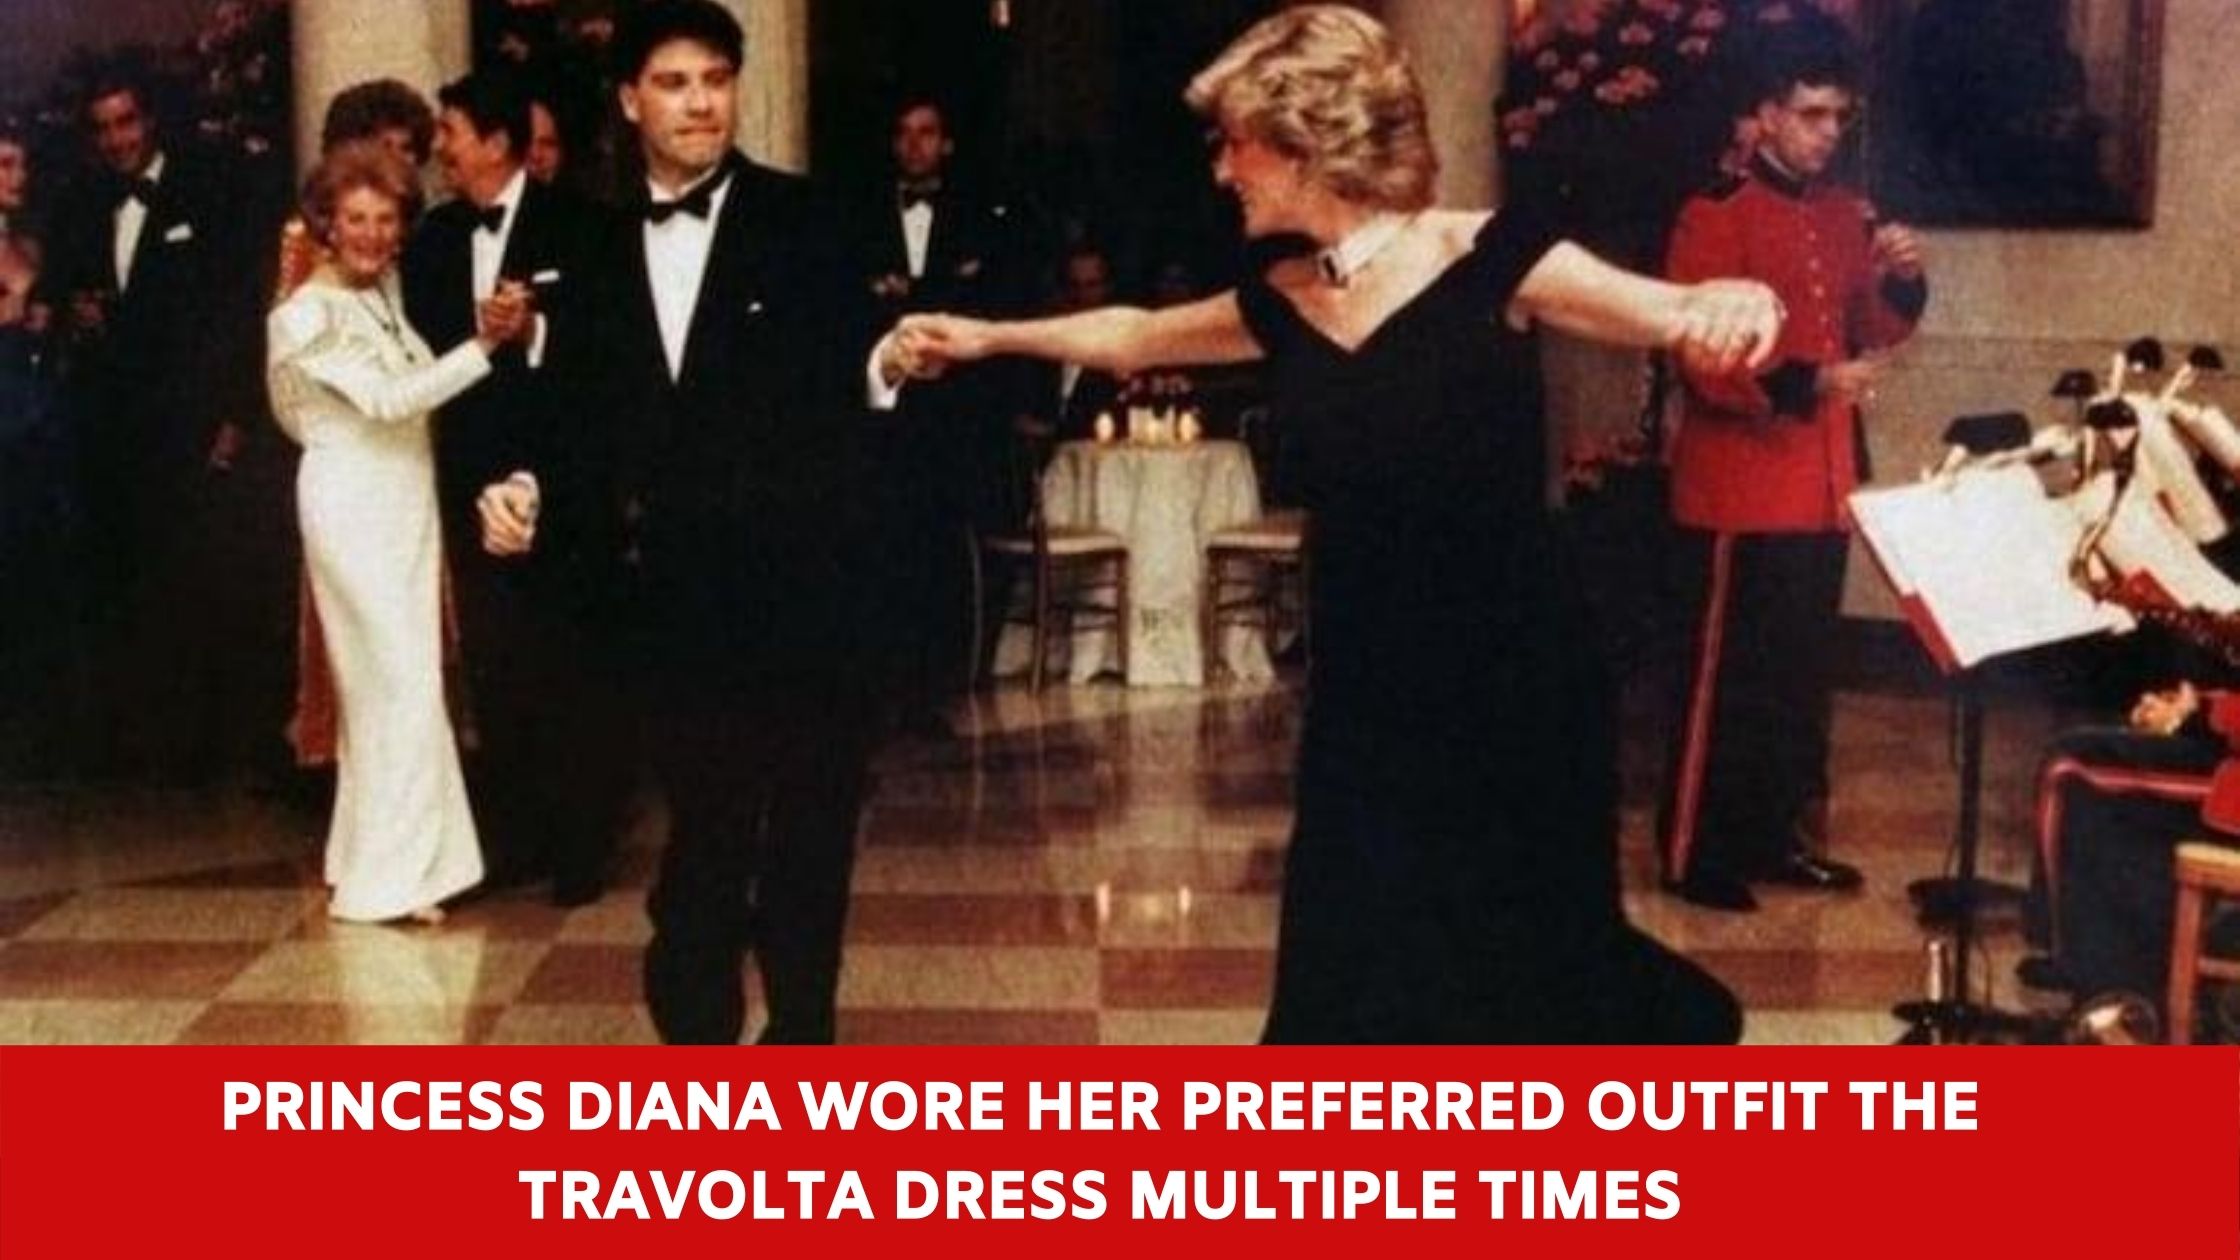 Princess Diana wore her preferred outfit the Travolta dress multiple times